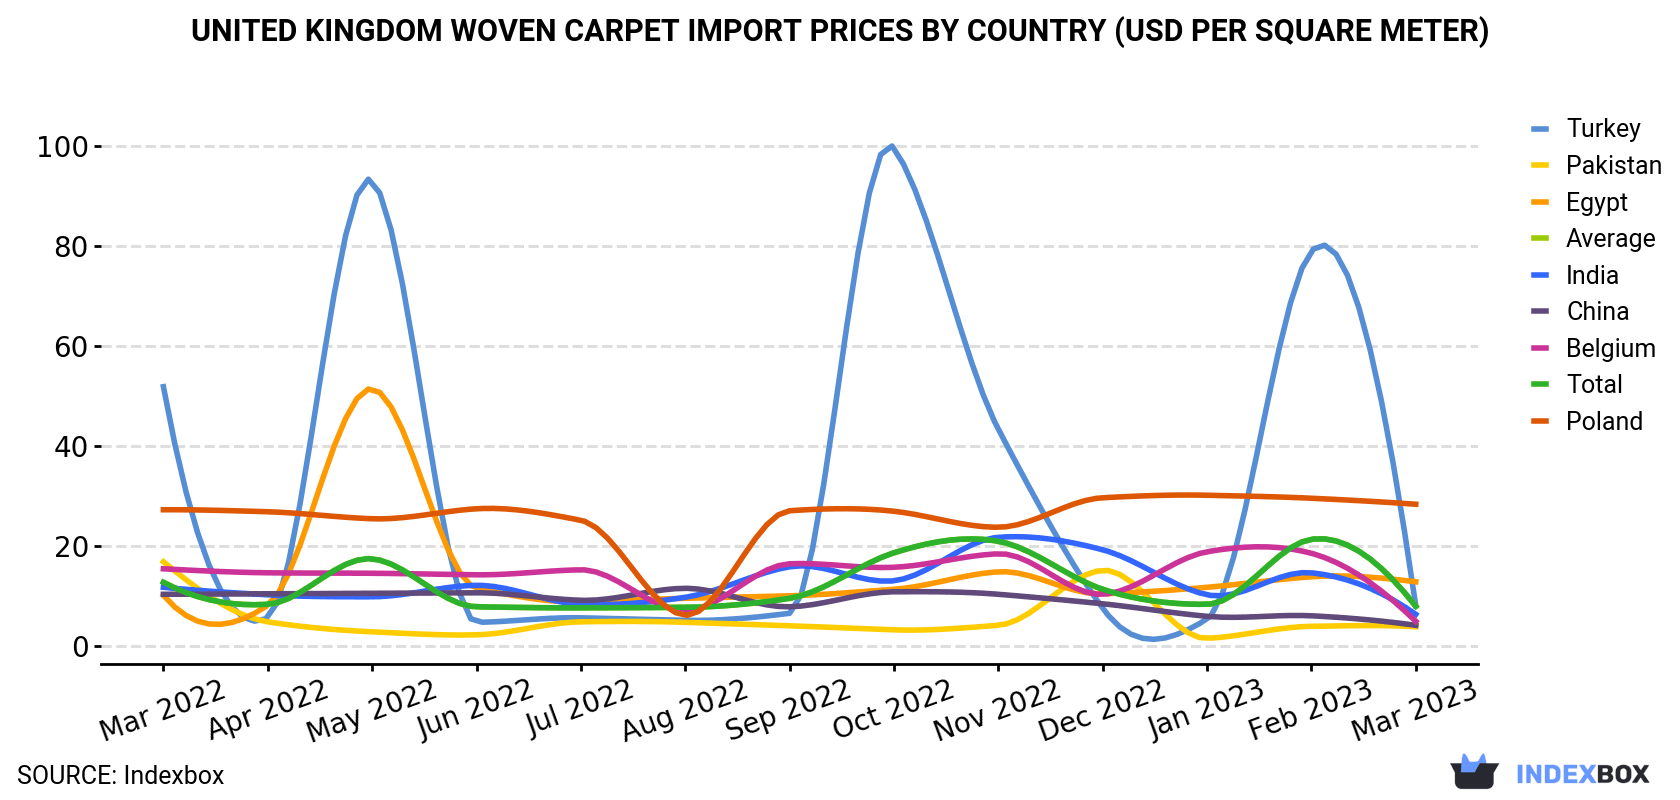 United Kingdom Woven Carpet Import Prices By Country (USD Per Square Meter)